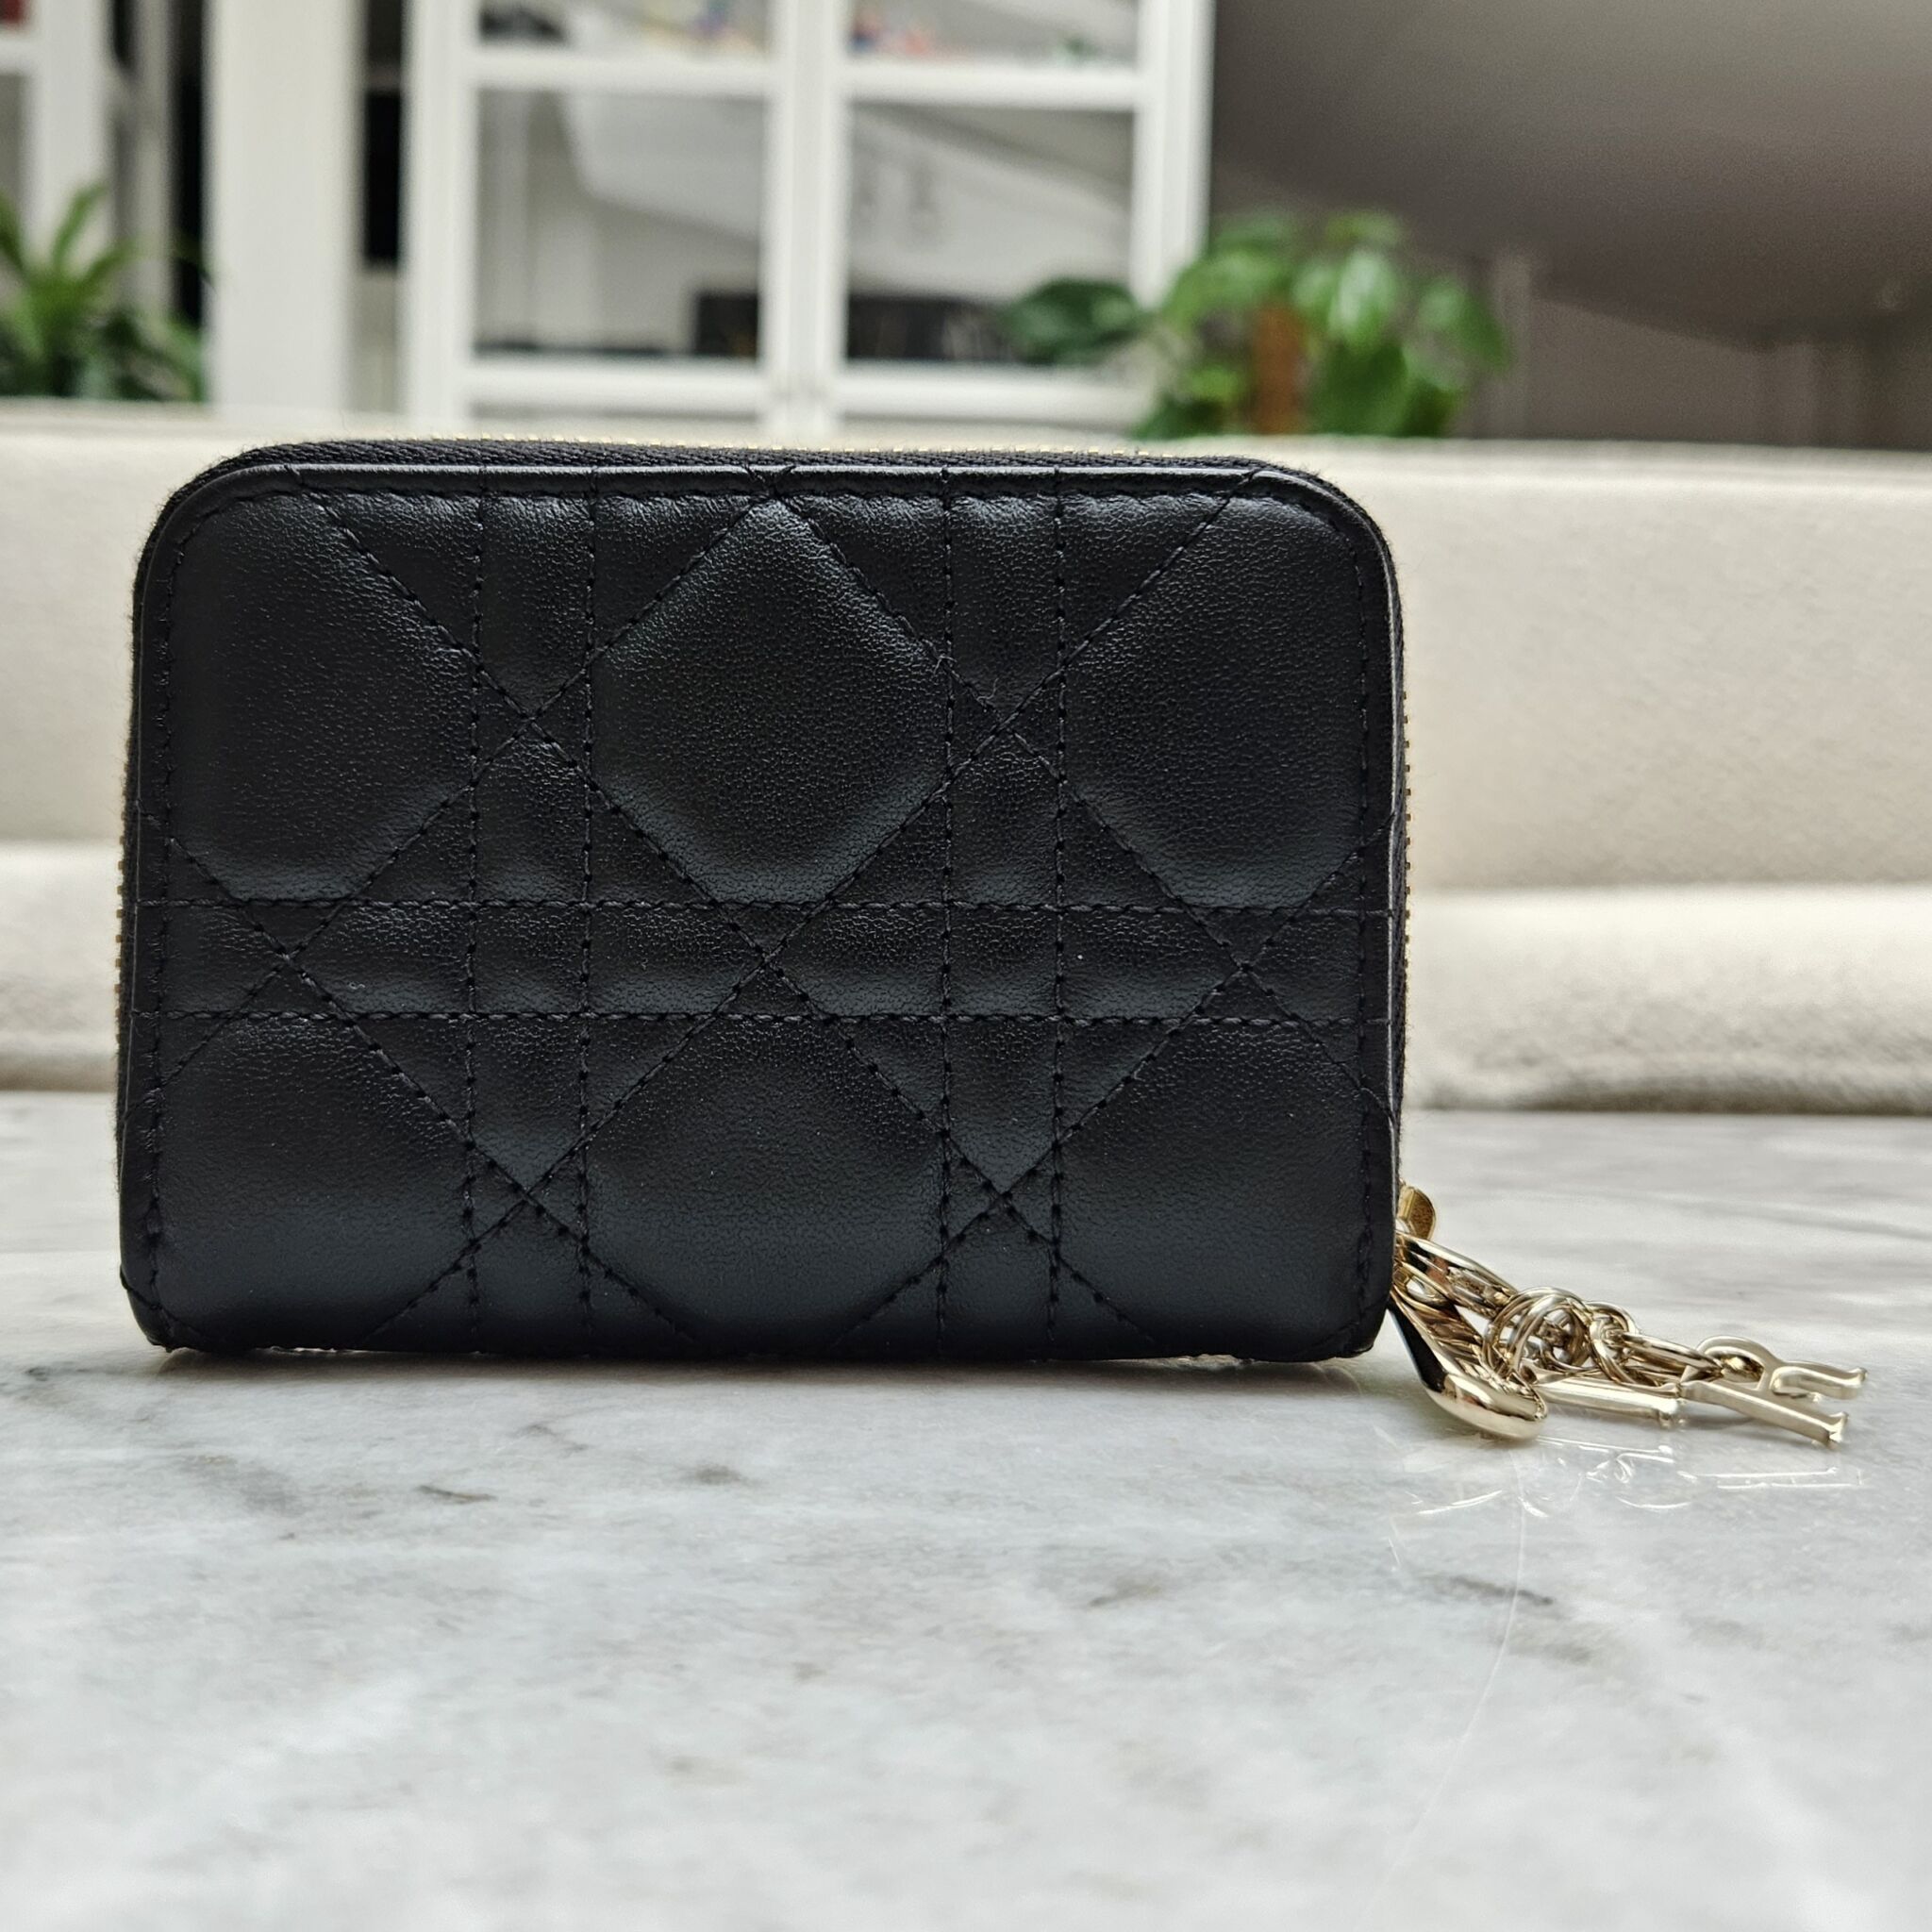 Lady Dior Voyageur Small Coin Purse Black Cannage Lambskin